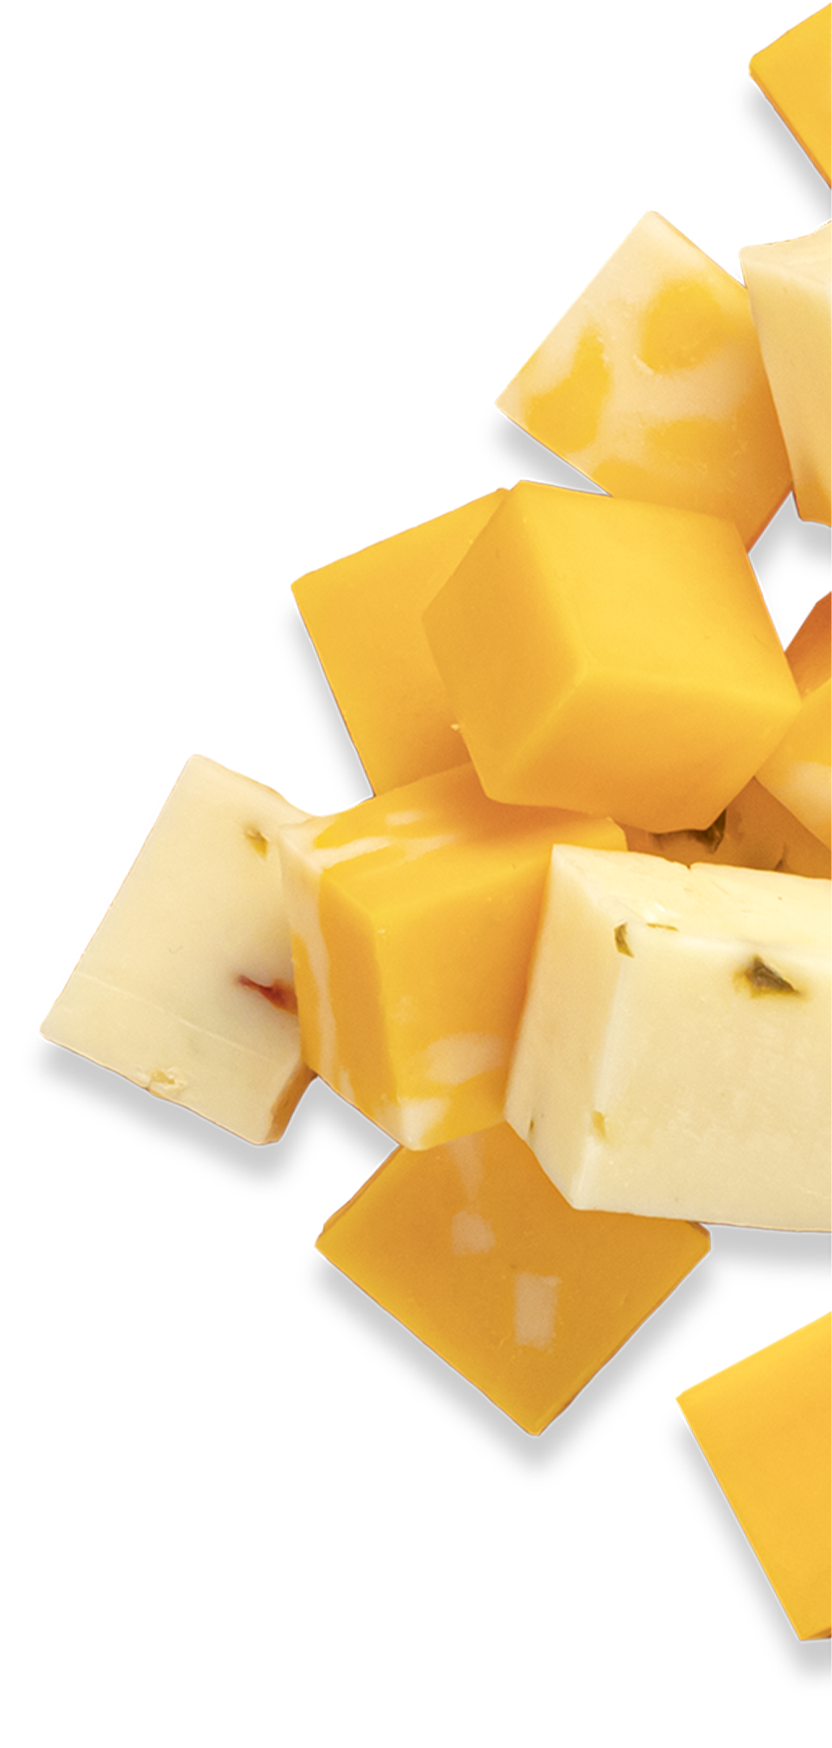 Slices of Wisconsin's Finest Cheddar Cheese